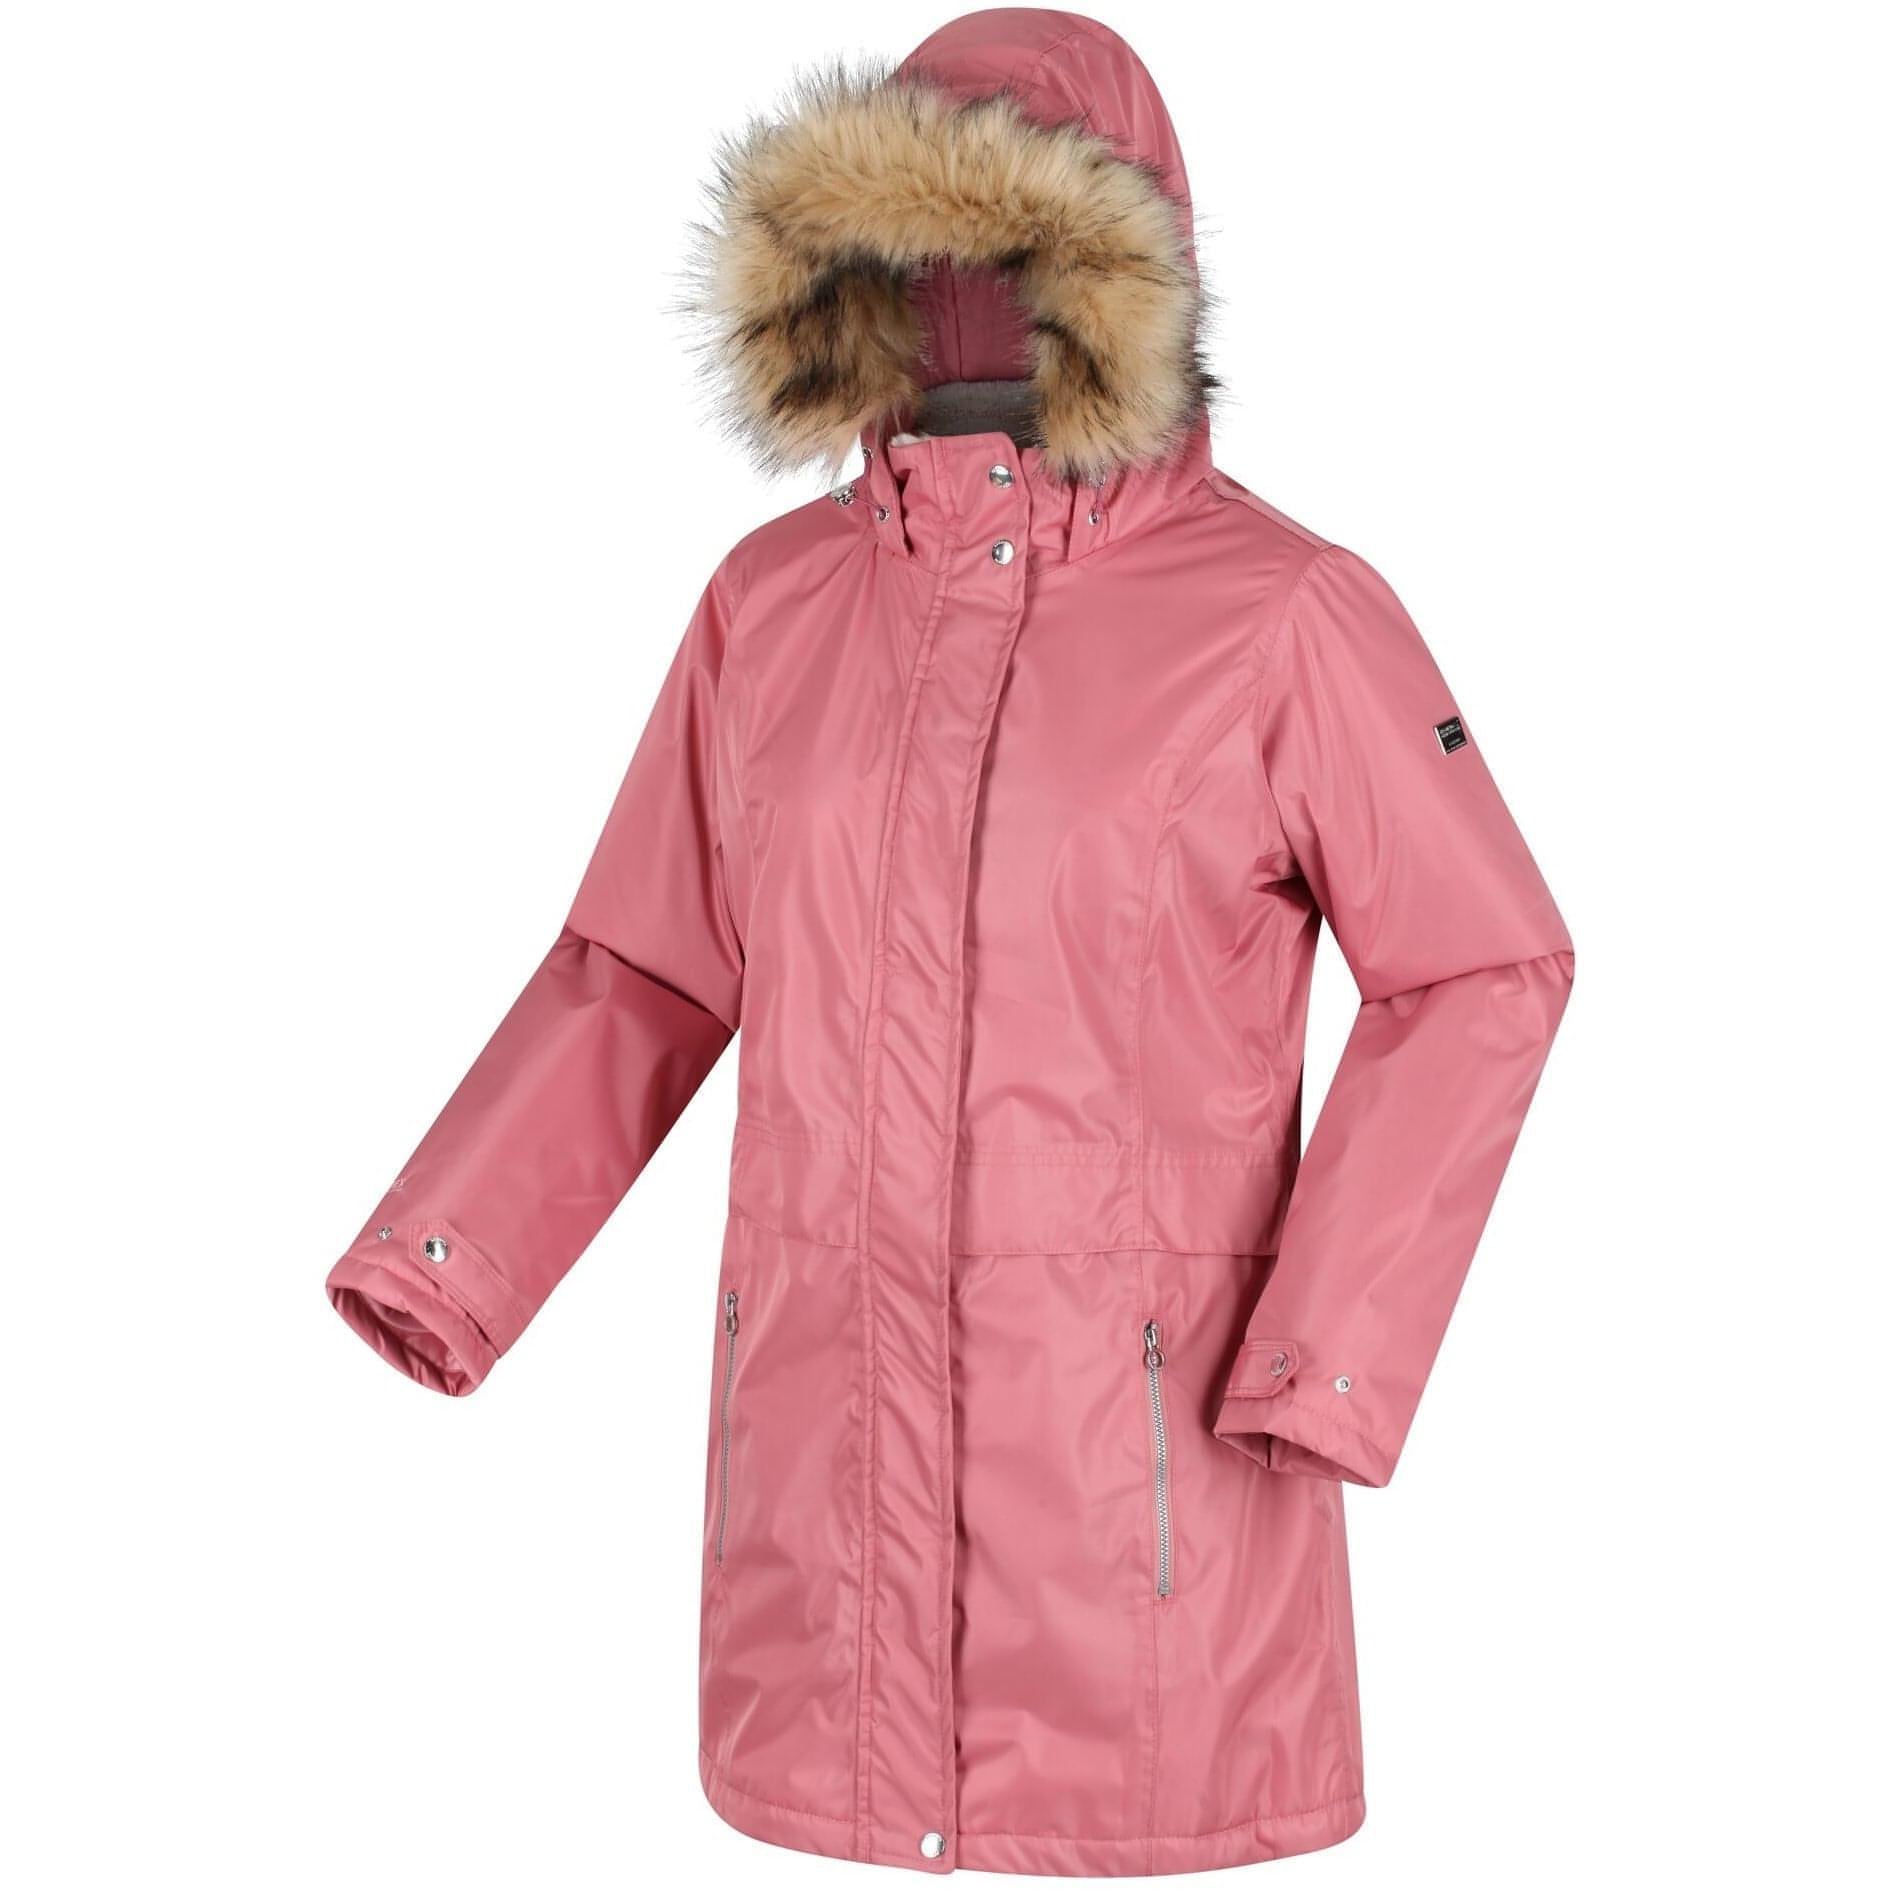 Regatta Lexis Waterproof Insulated Parka Jacket Rwp301 9Lb Front - Front View